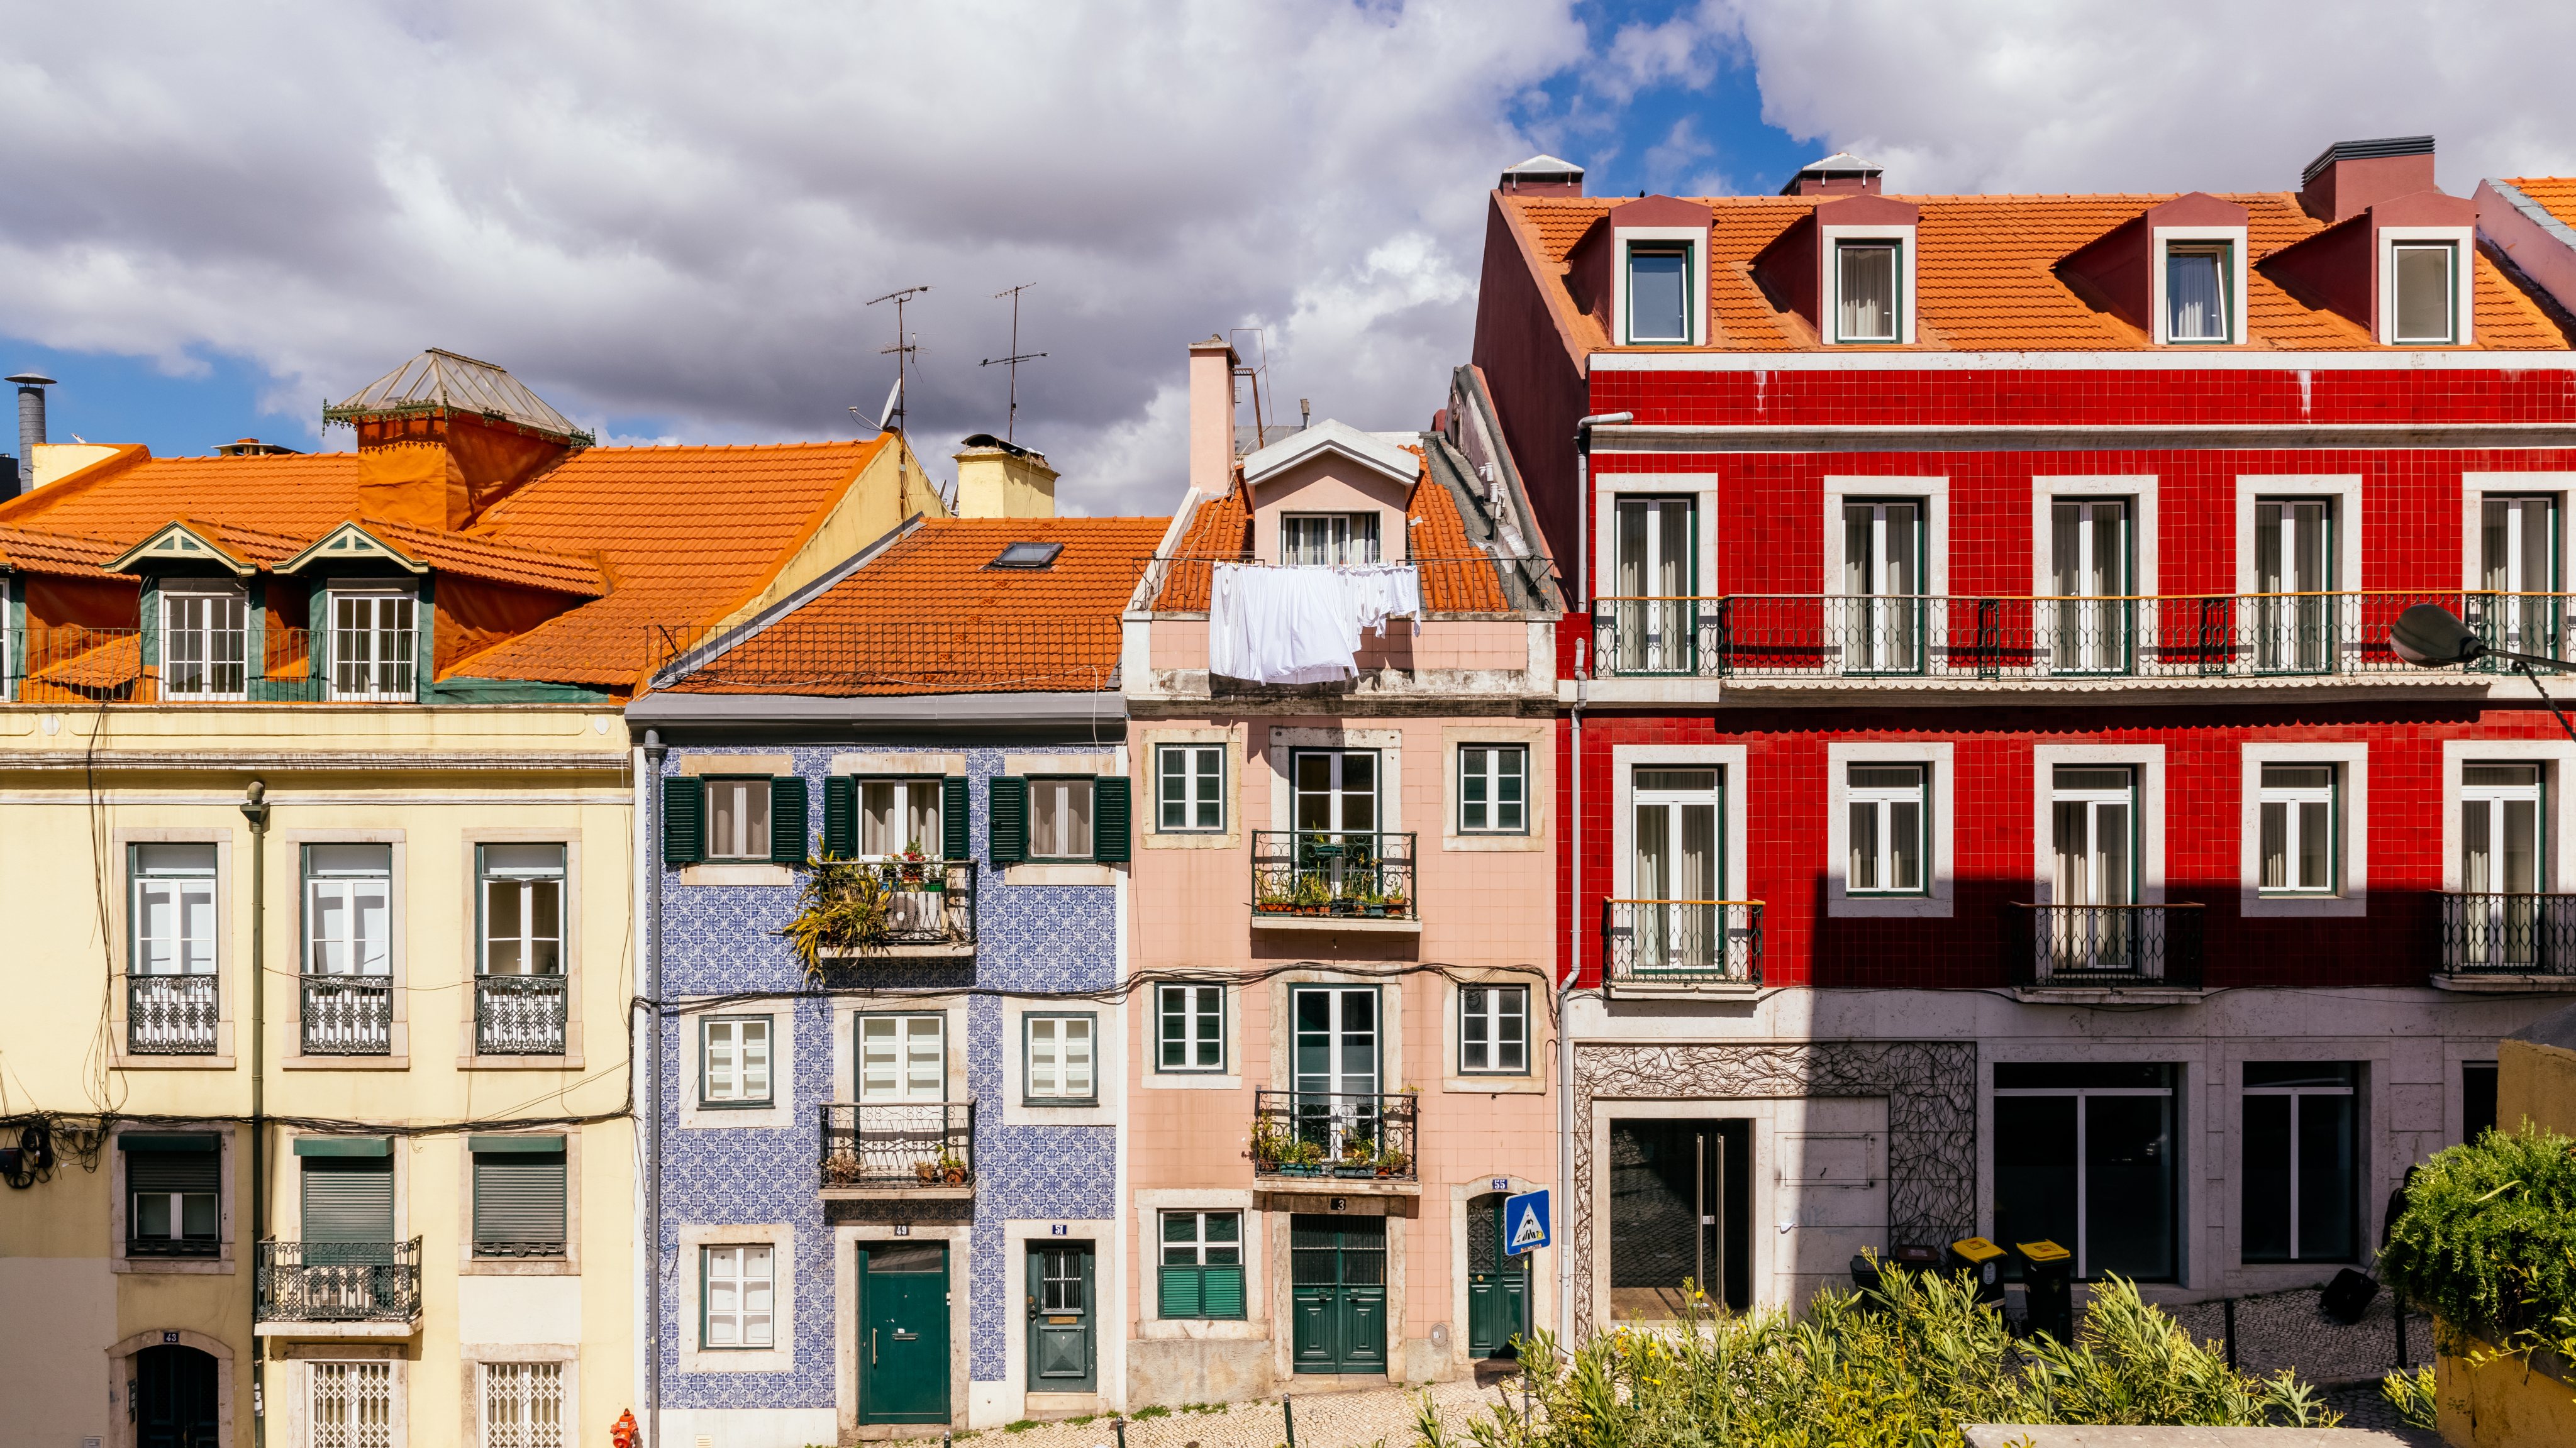 Residential houses on the street in Lisbon old town, Portugal